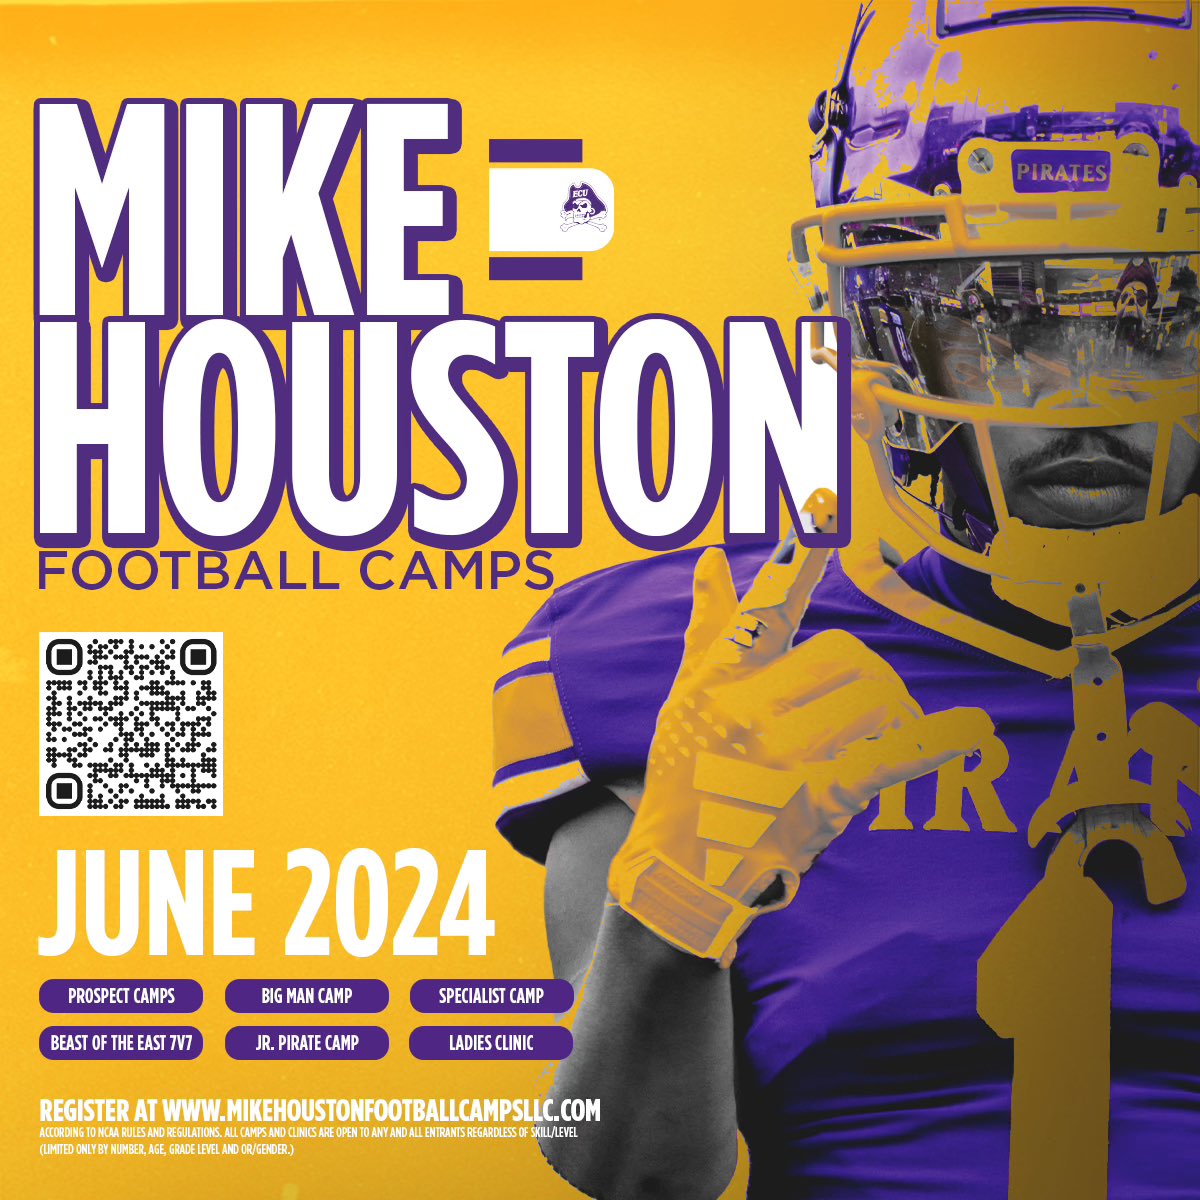 Camp season will be here before you know it! Register at MikeHoustonFootballCampsLLC.com